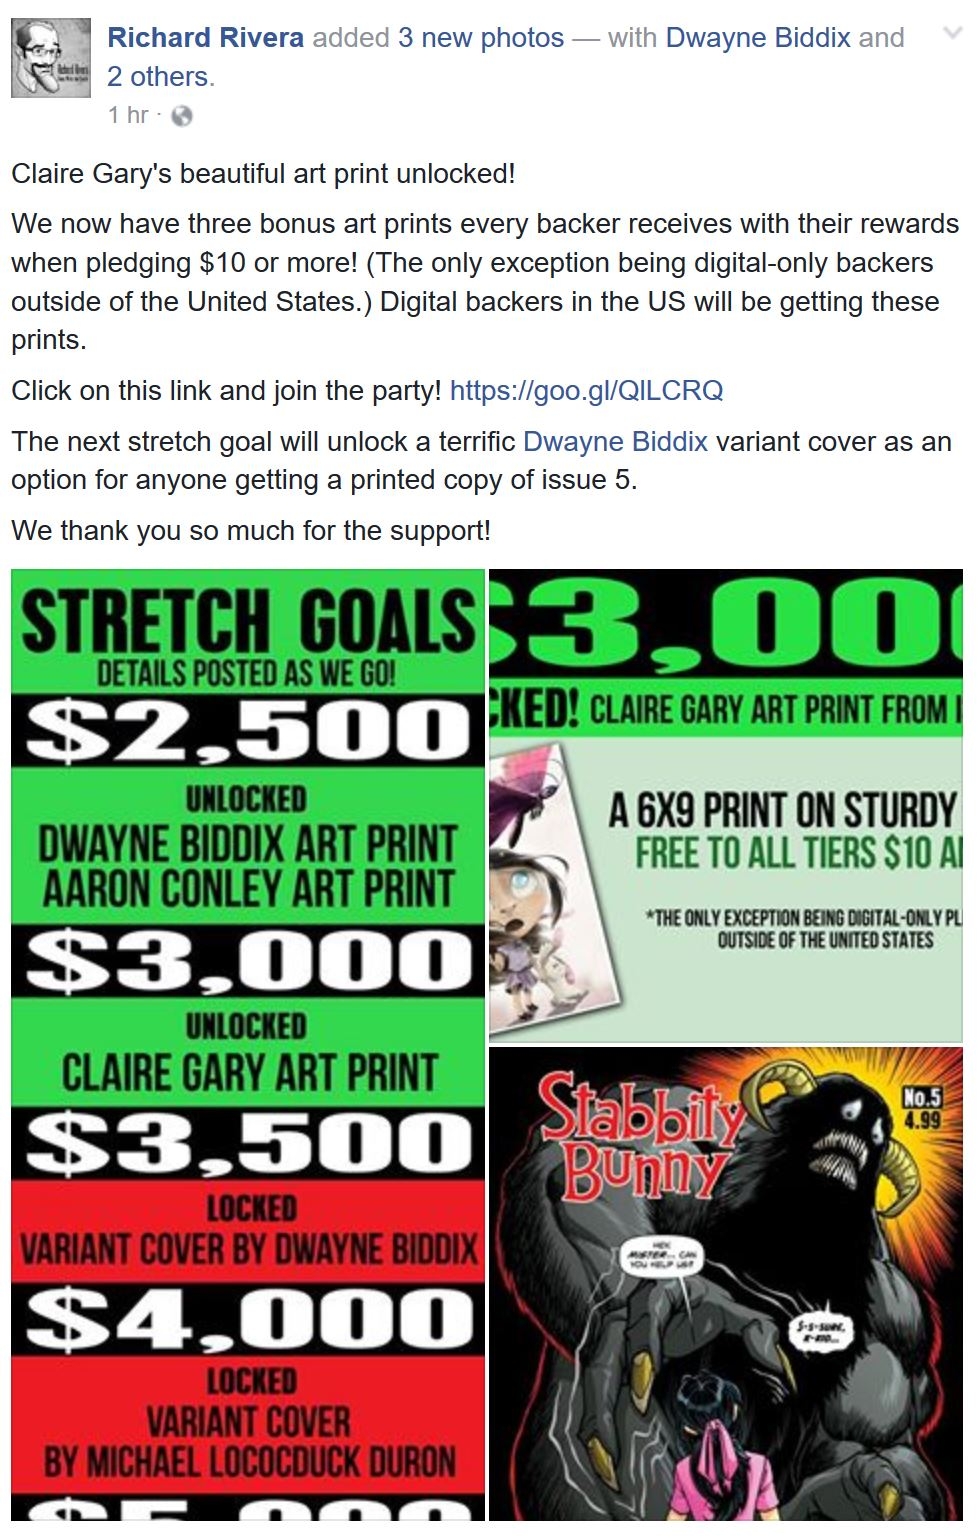 Stab into these stretch goals!!!!!